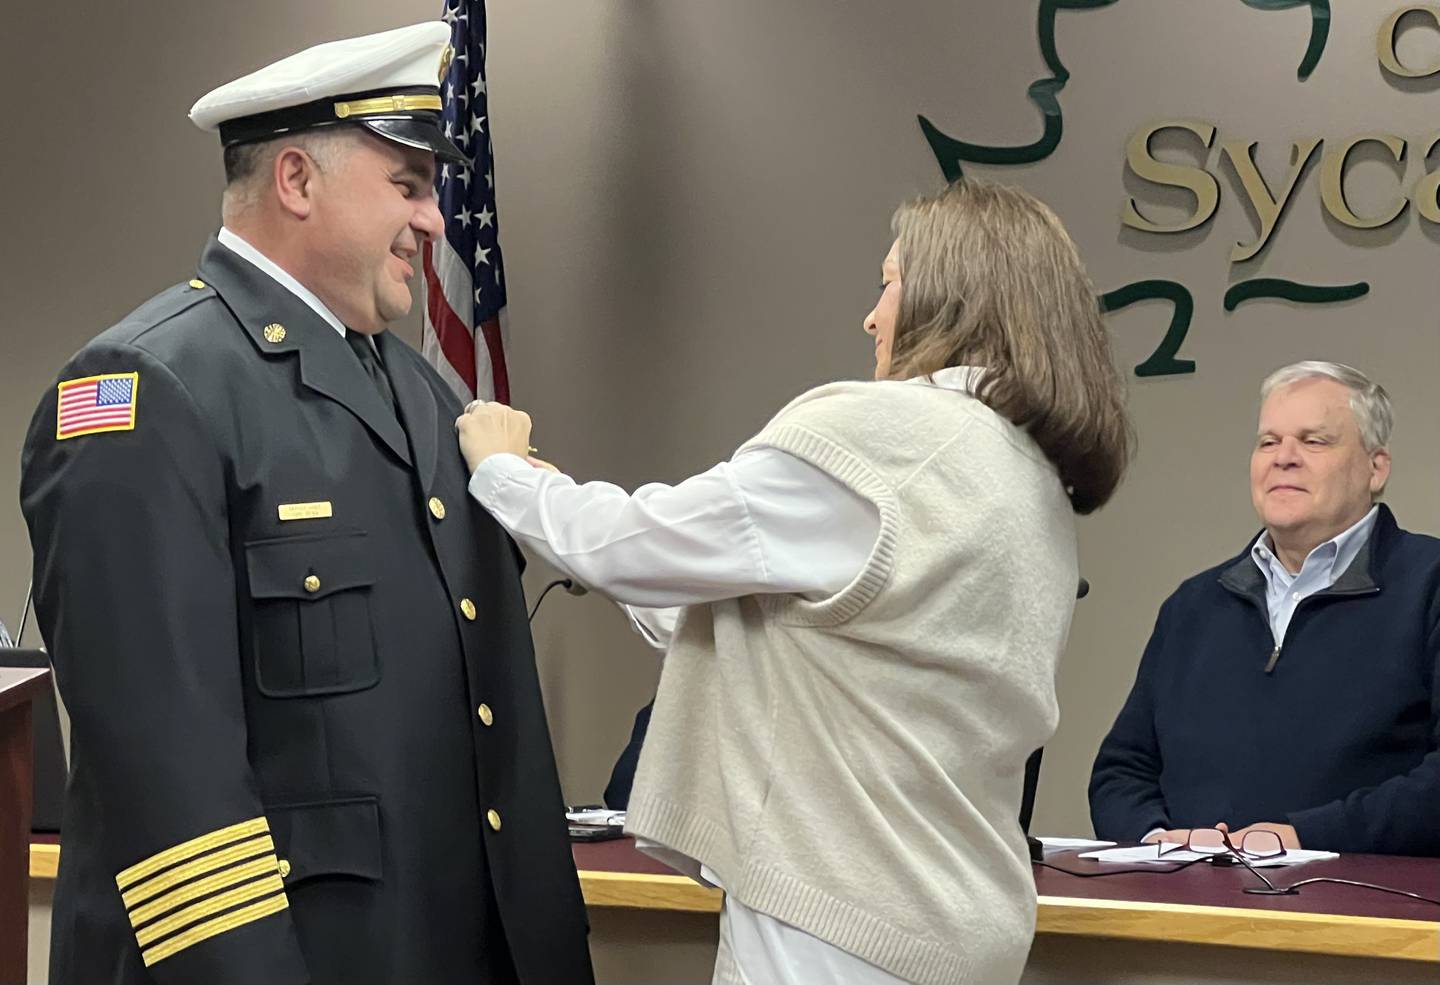 Sycamore Mayor, Steve Braser, right, watches as Kelly Reina, middle, pins the Sycamore fire chief badge to her husband on Jan. 18, 2023, when Carl Reina was sworn-in as the Sycamore fire chief.